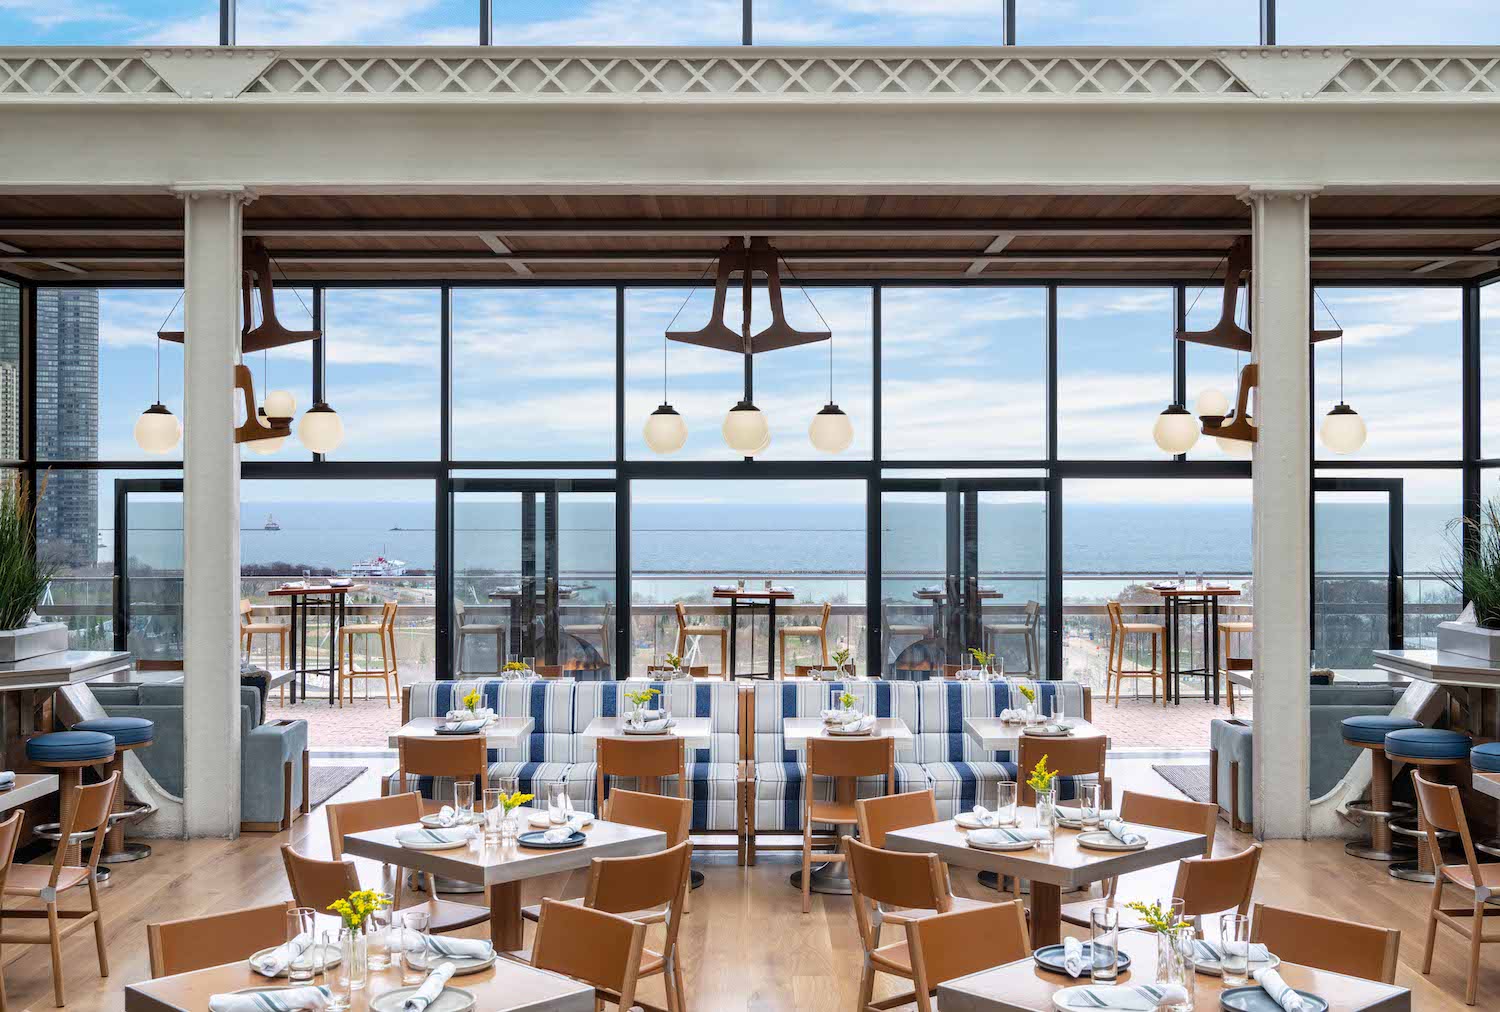 a rooftop bar with striped banquettes and views of lake michigan